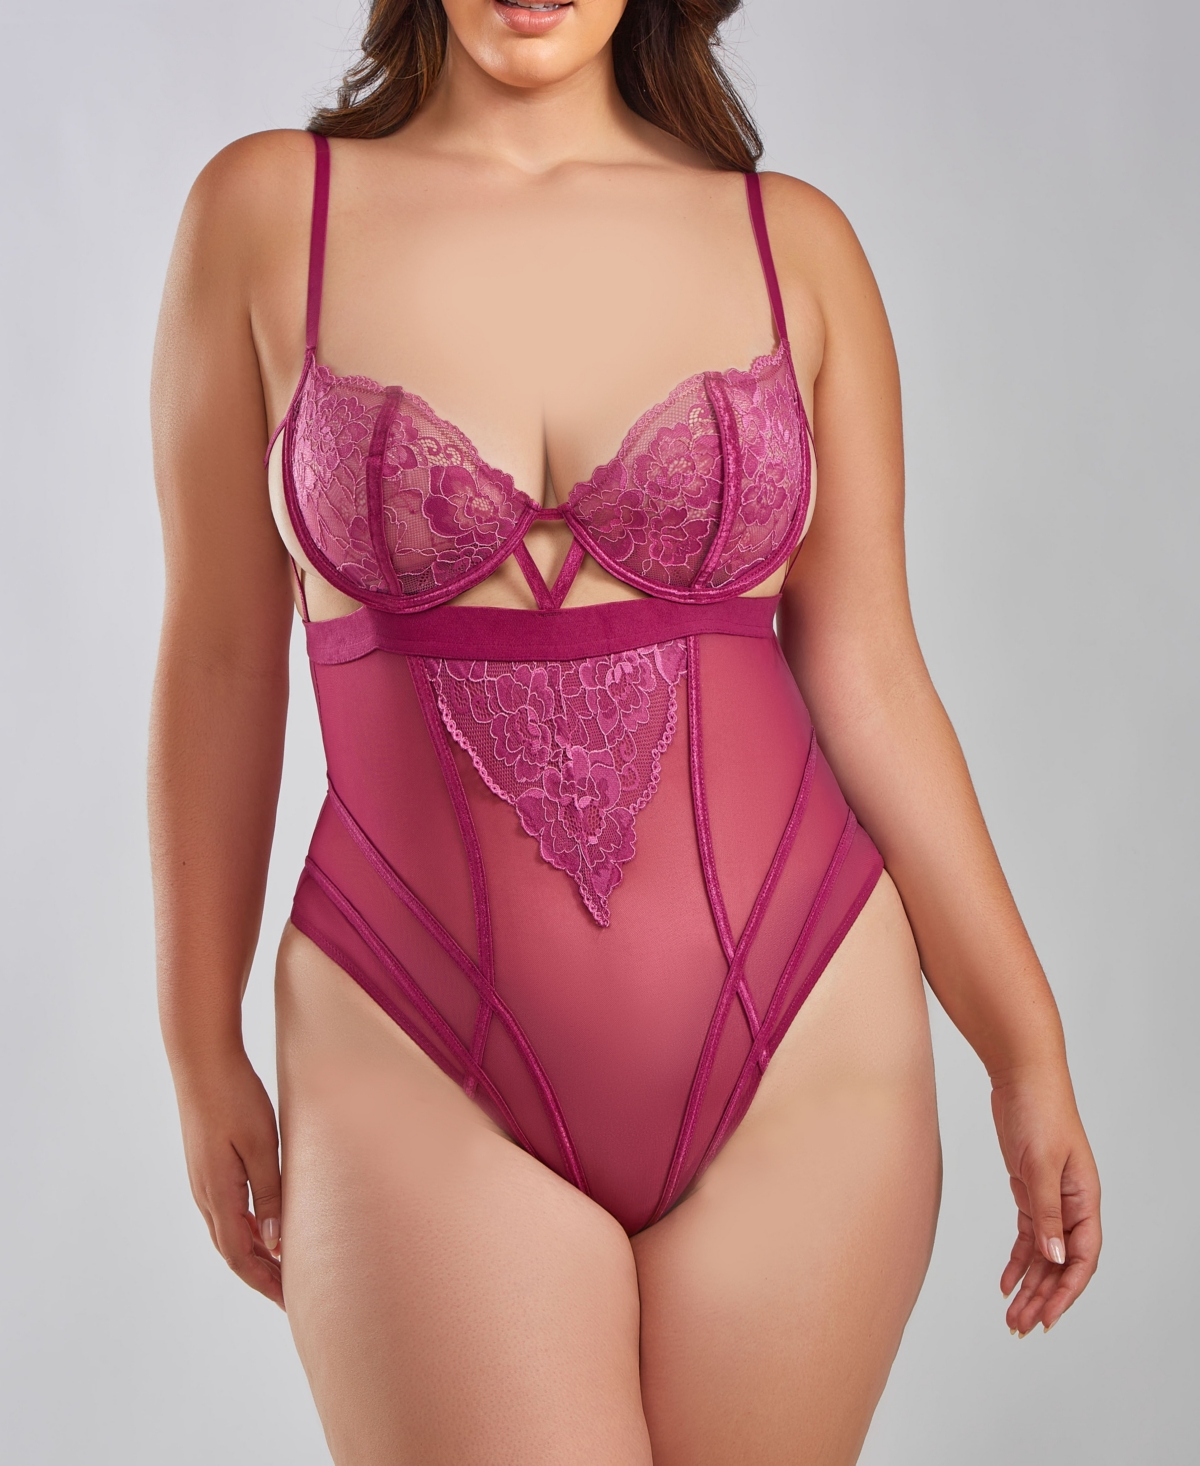 ICOLLECTION ICOLLECTION RUBY PLUS SIZE UNDERWIRE LACE BRA CAGED FRONT TEDDY